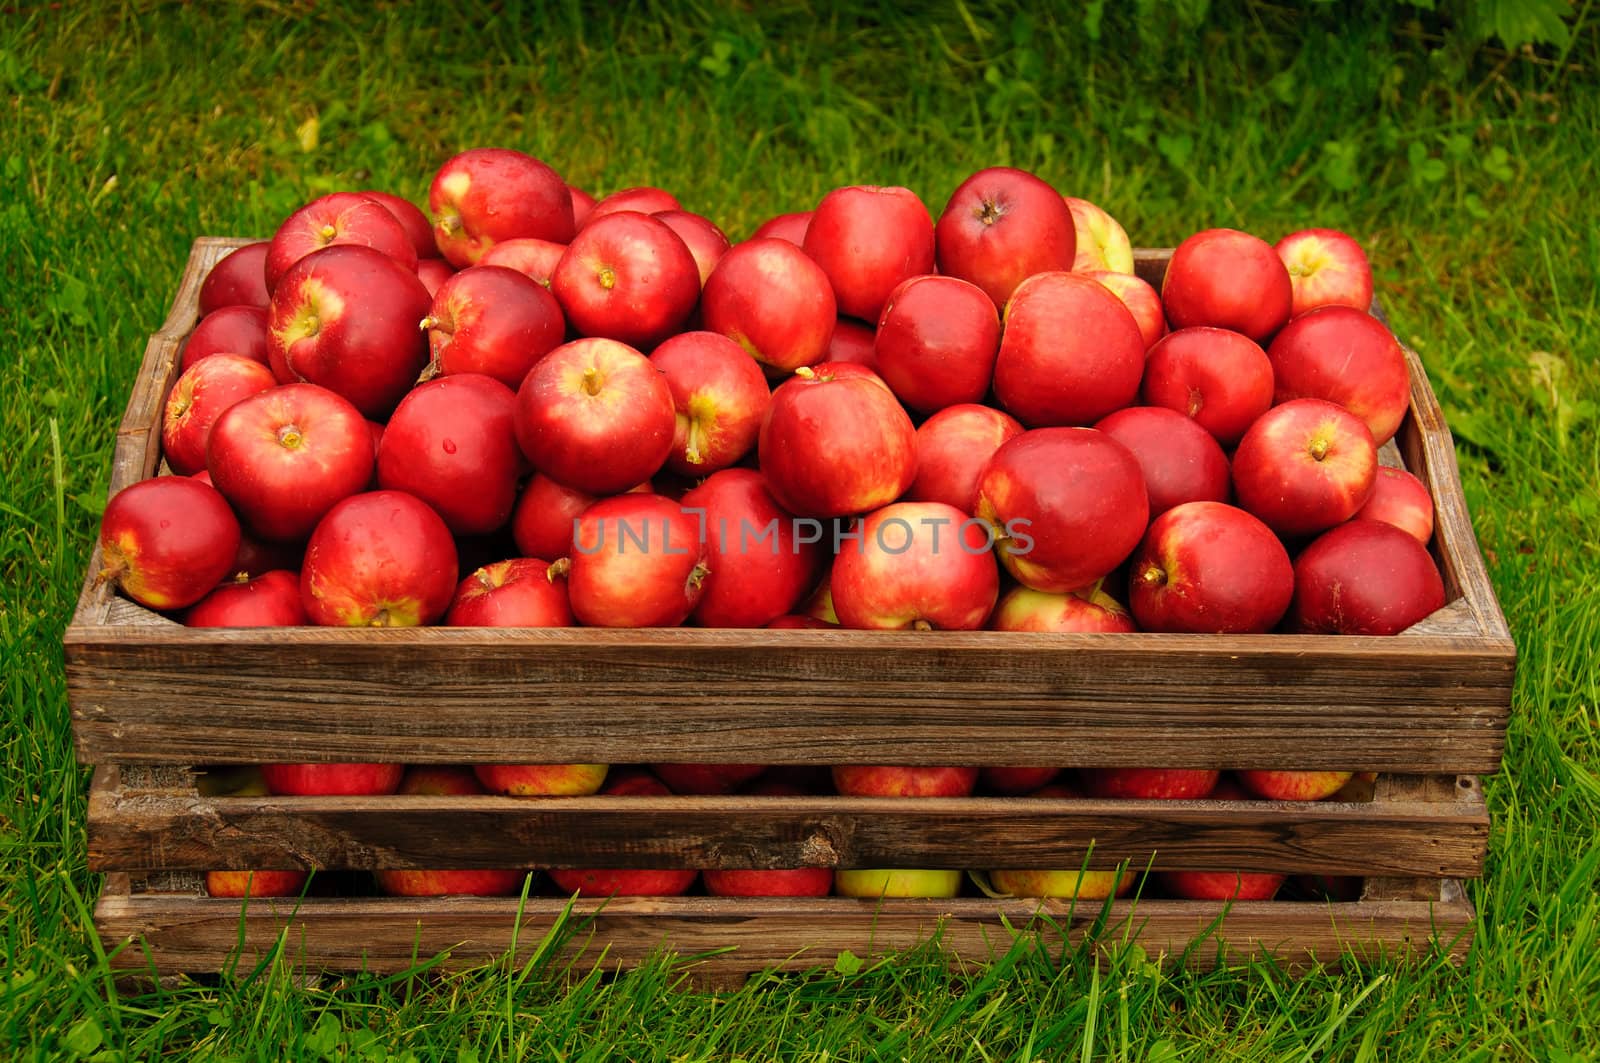 Red apples in a box by GryT